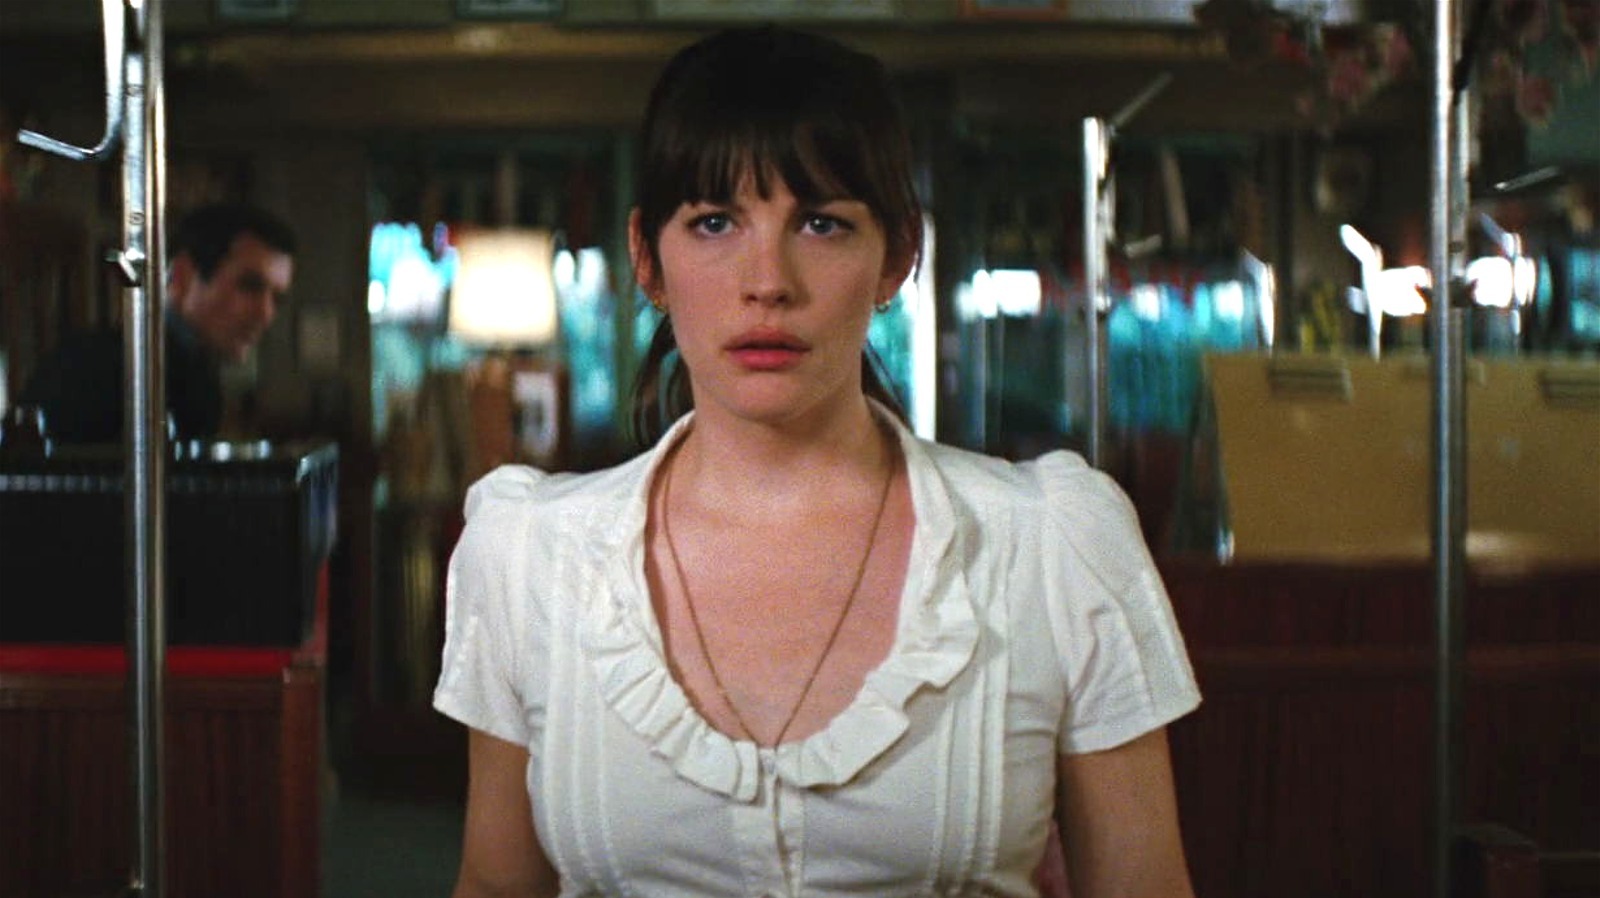 Liv Tyler Joins 'Captain America 4' to Play Betty Ross